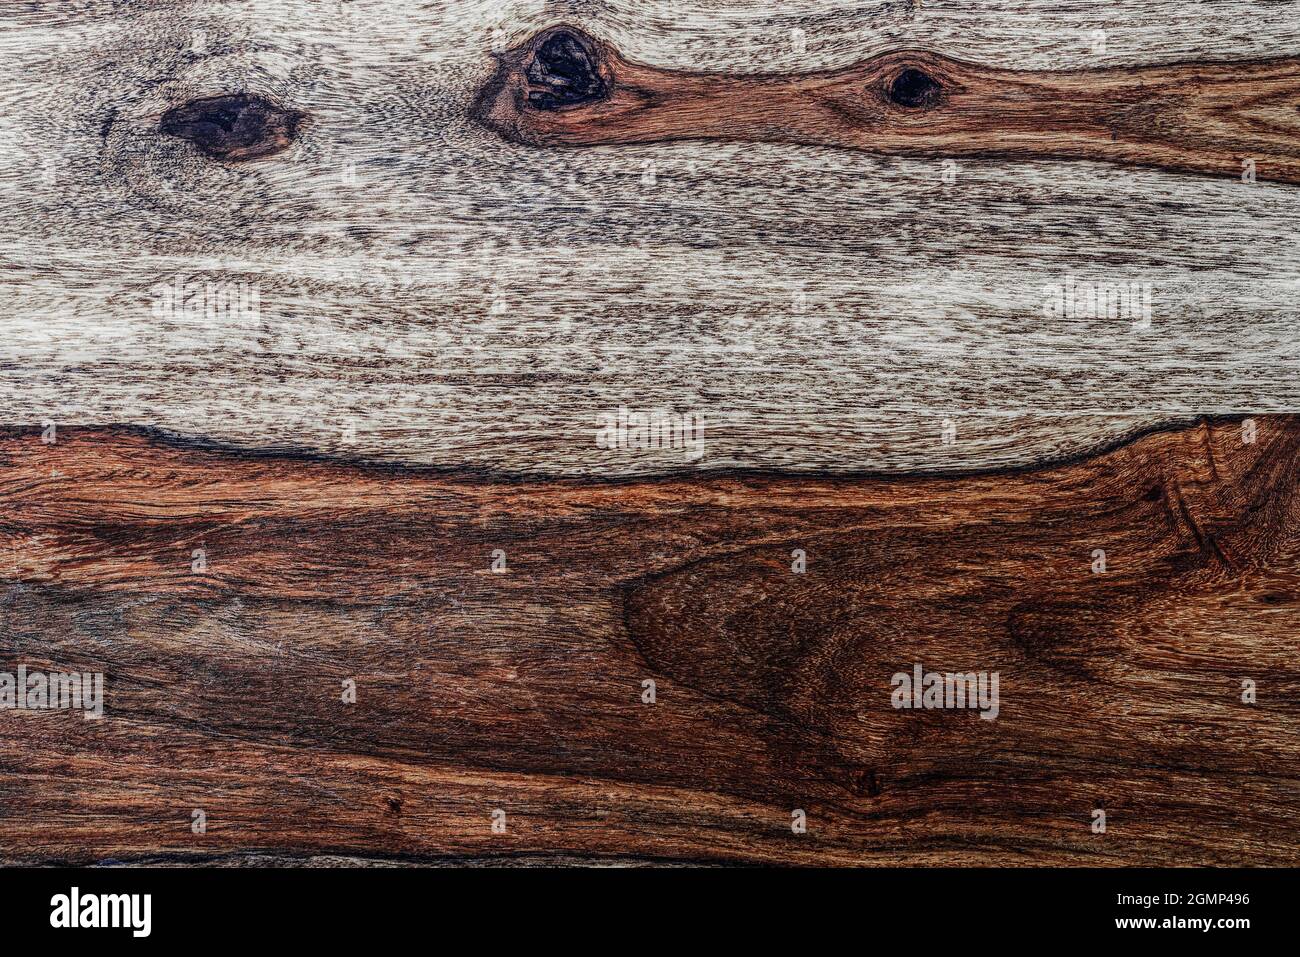 close-up brown rustic wood grain textured background Stock Photo